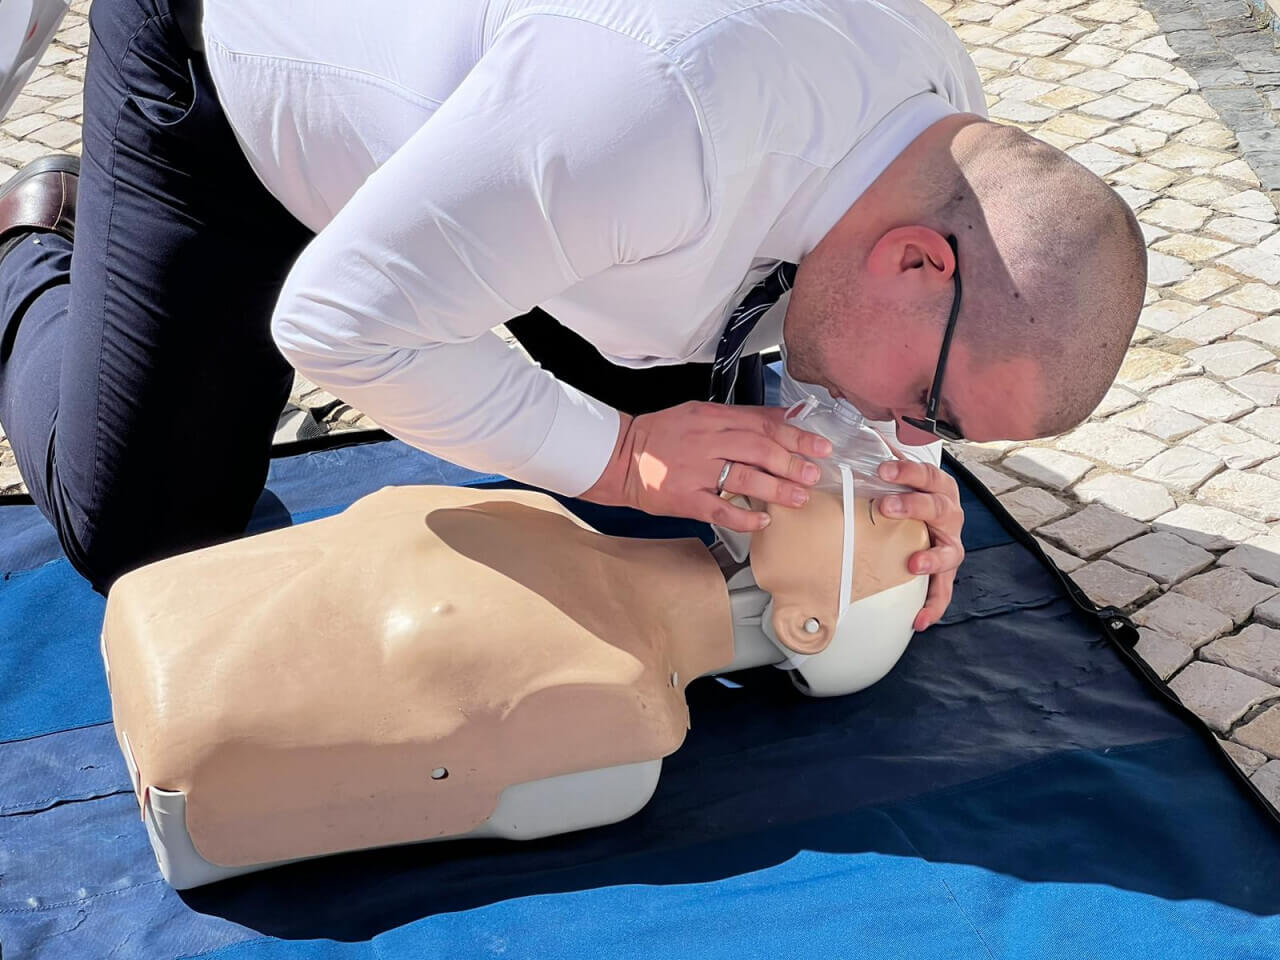 Algarviptravel Drivers: Ensuring Passenger Safety and Emergency Preparedness with Certified Basic Life Support Training